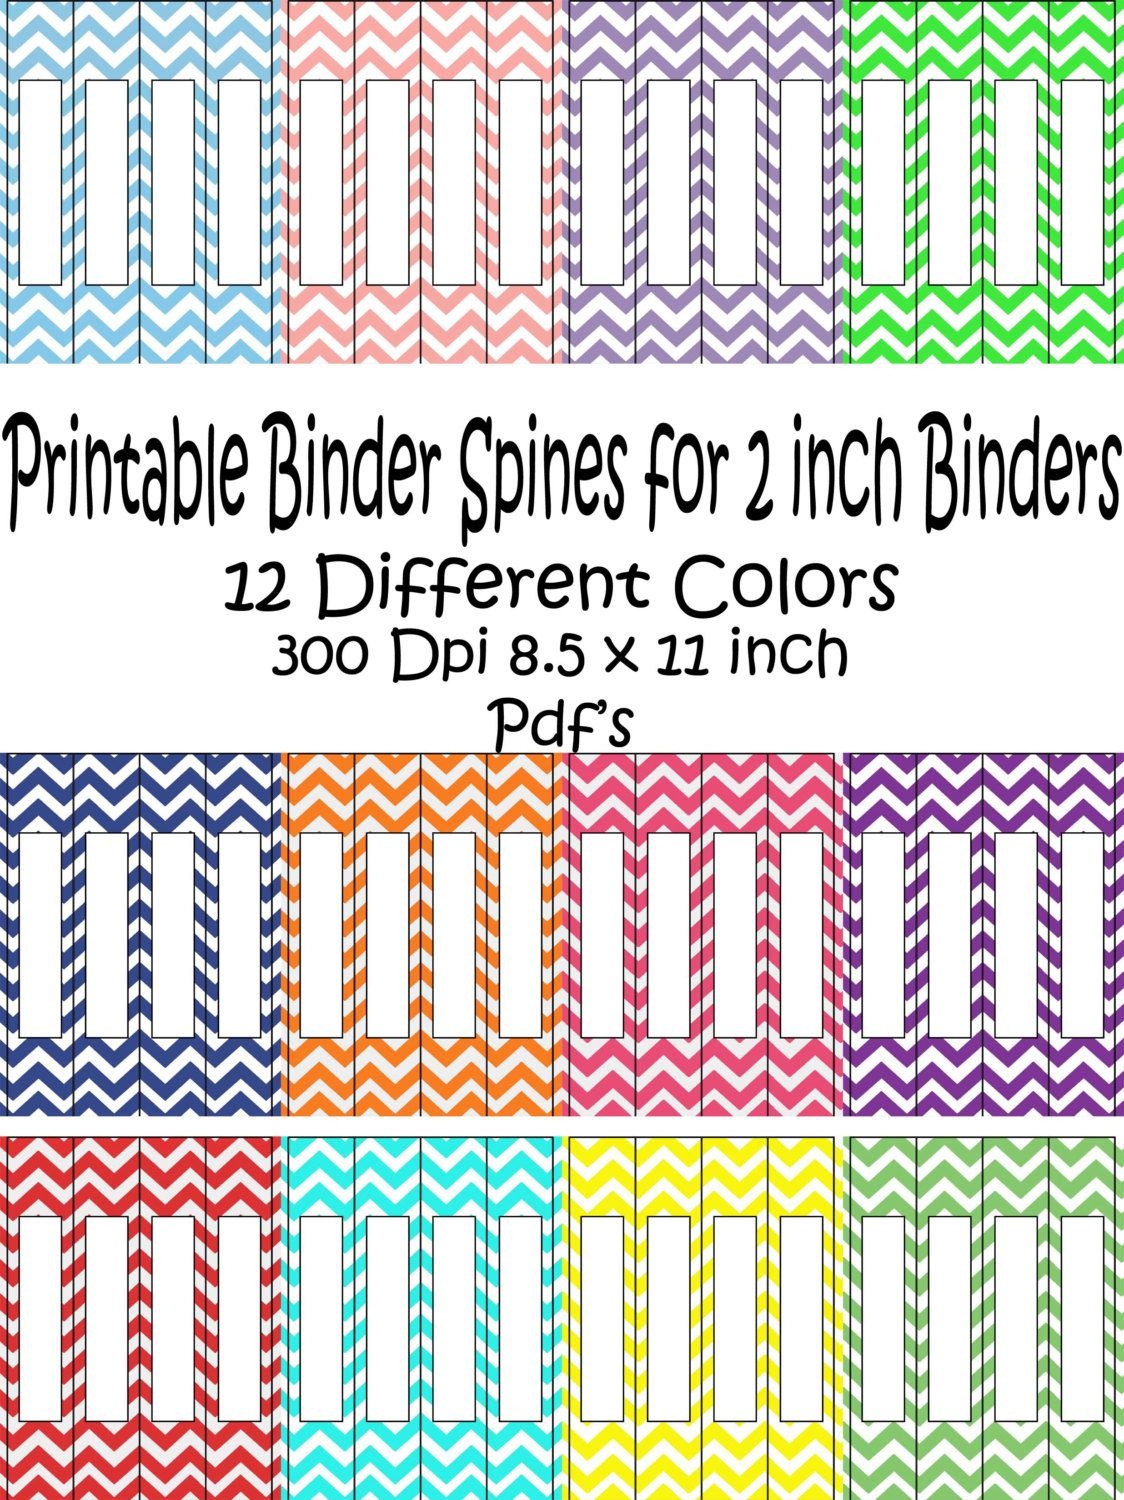 Printable Binder Spine Pack Size 2 Inch-12 Different Colors In - Free Printable Binder Covers And Spines